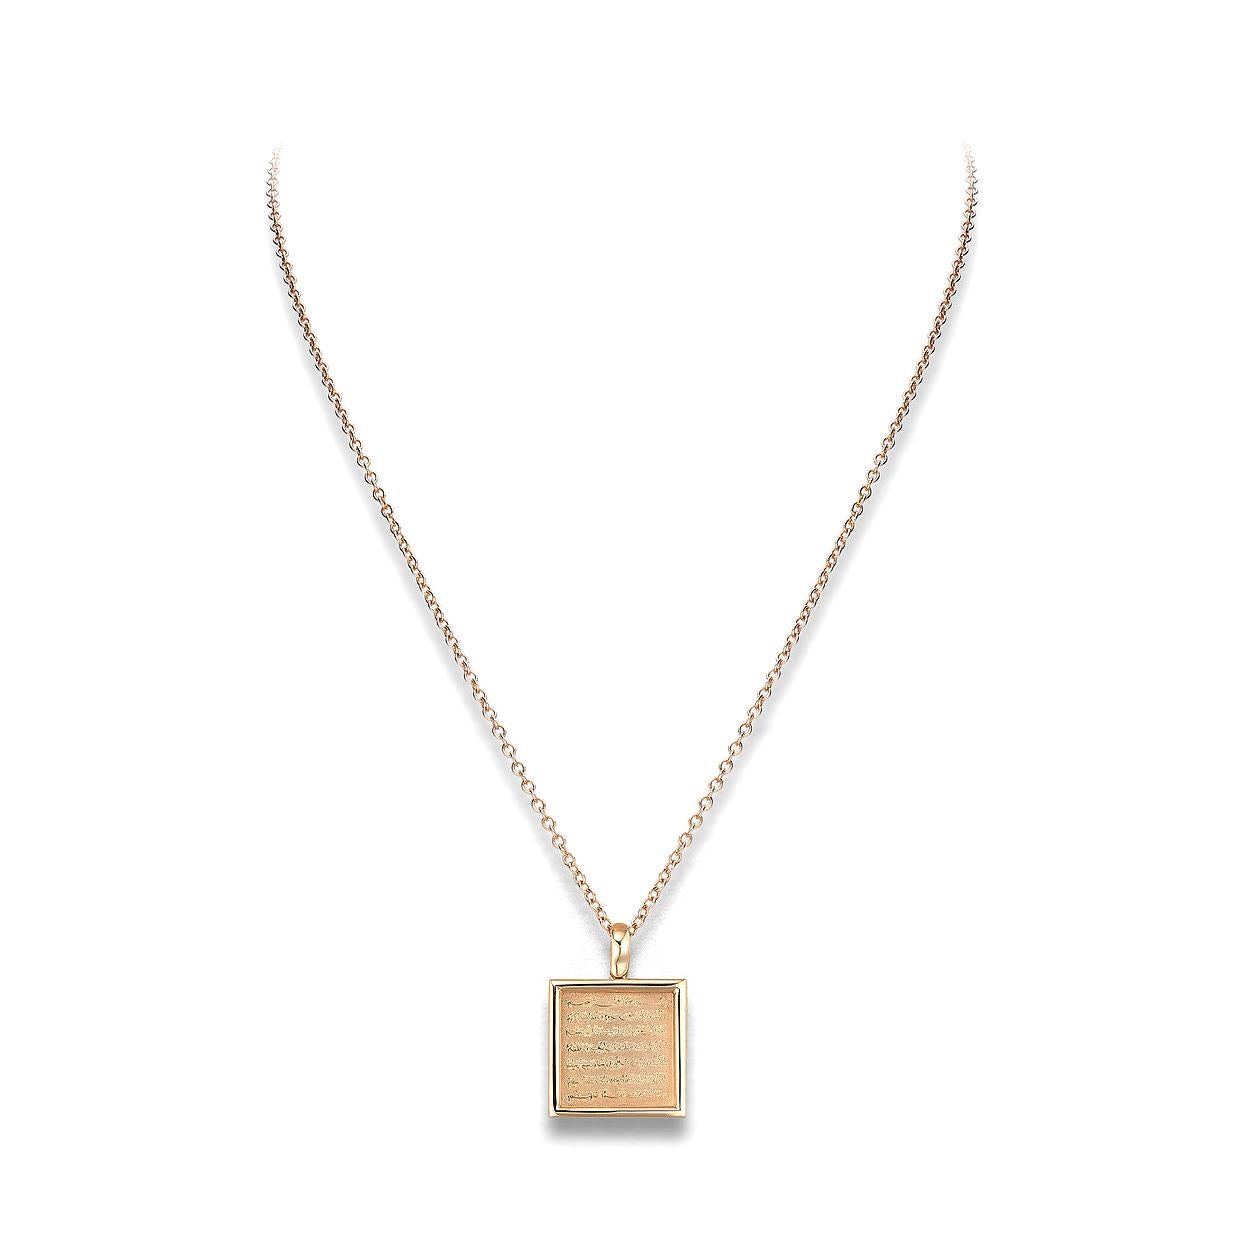 Sourate pendant in 18kt pink gold